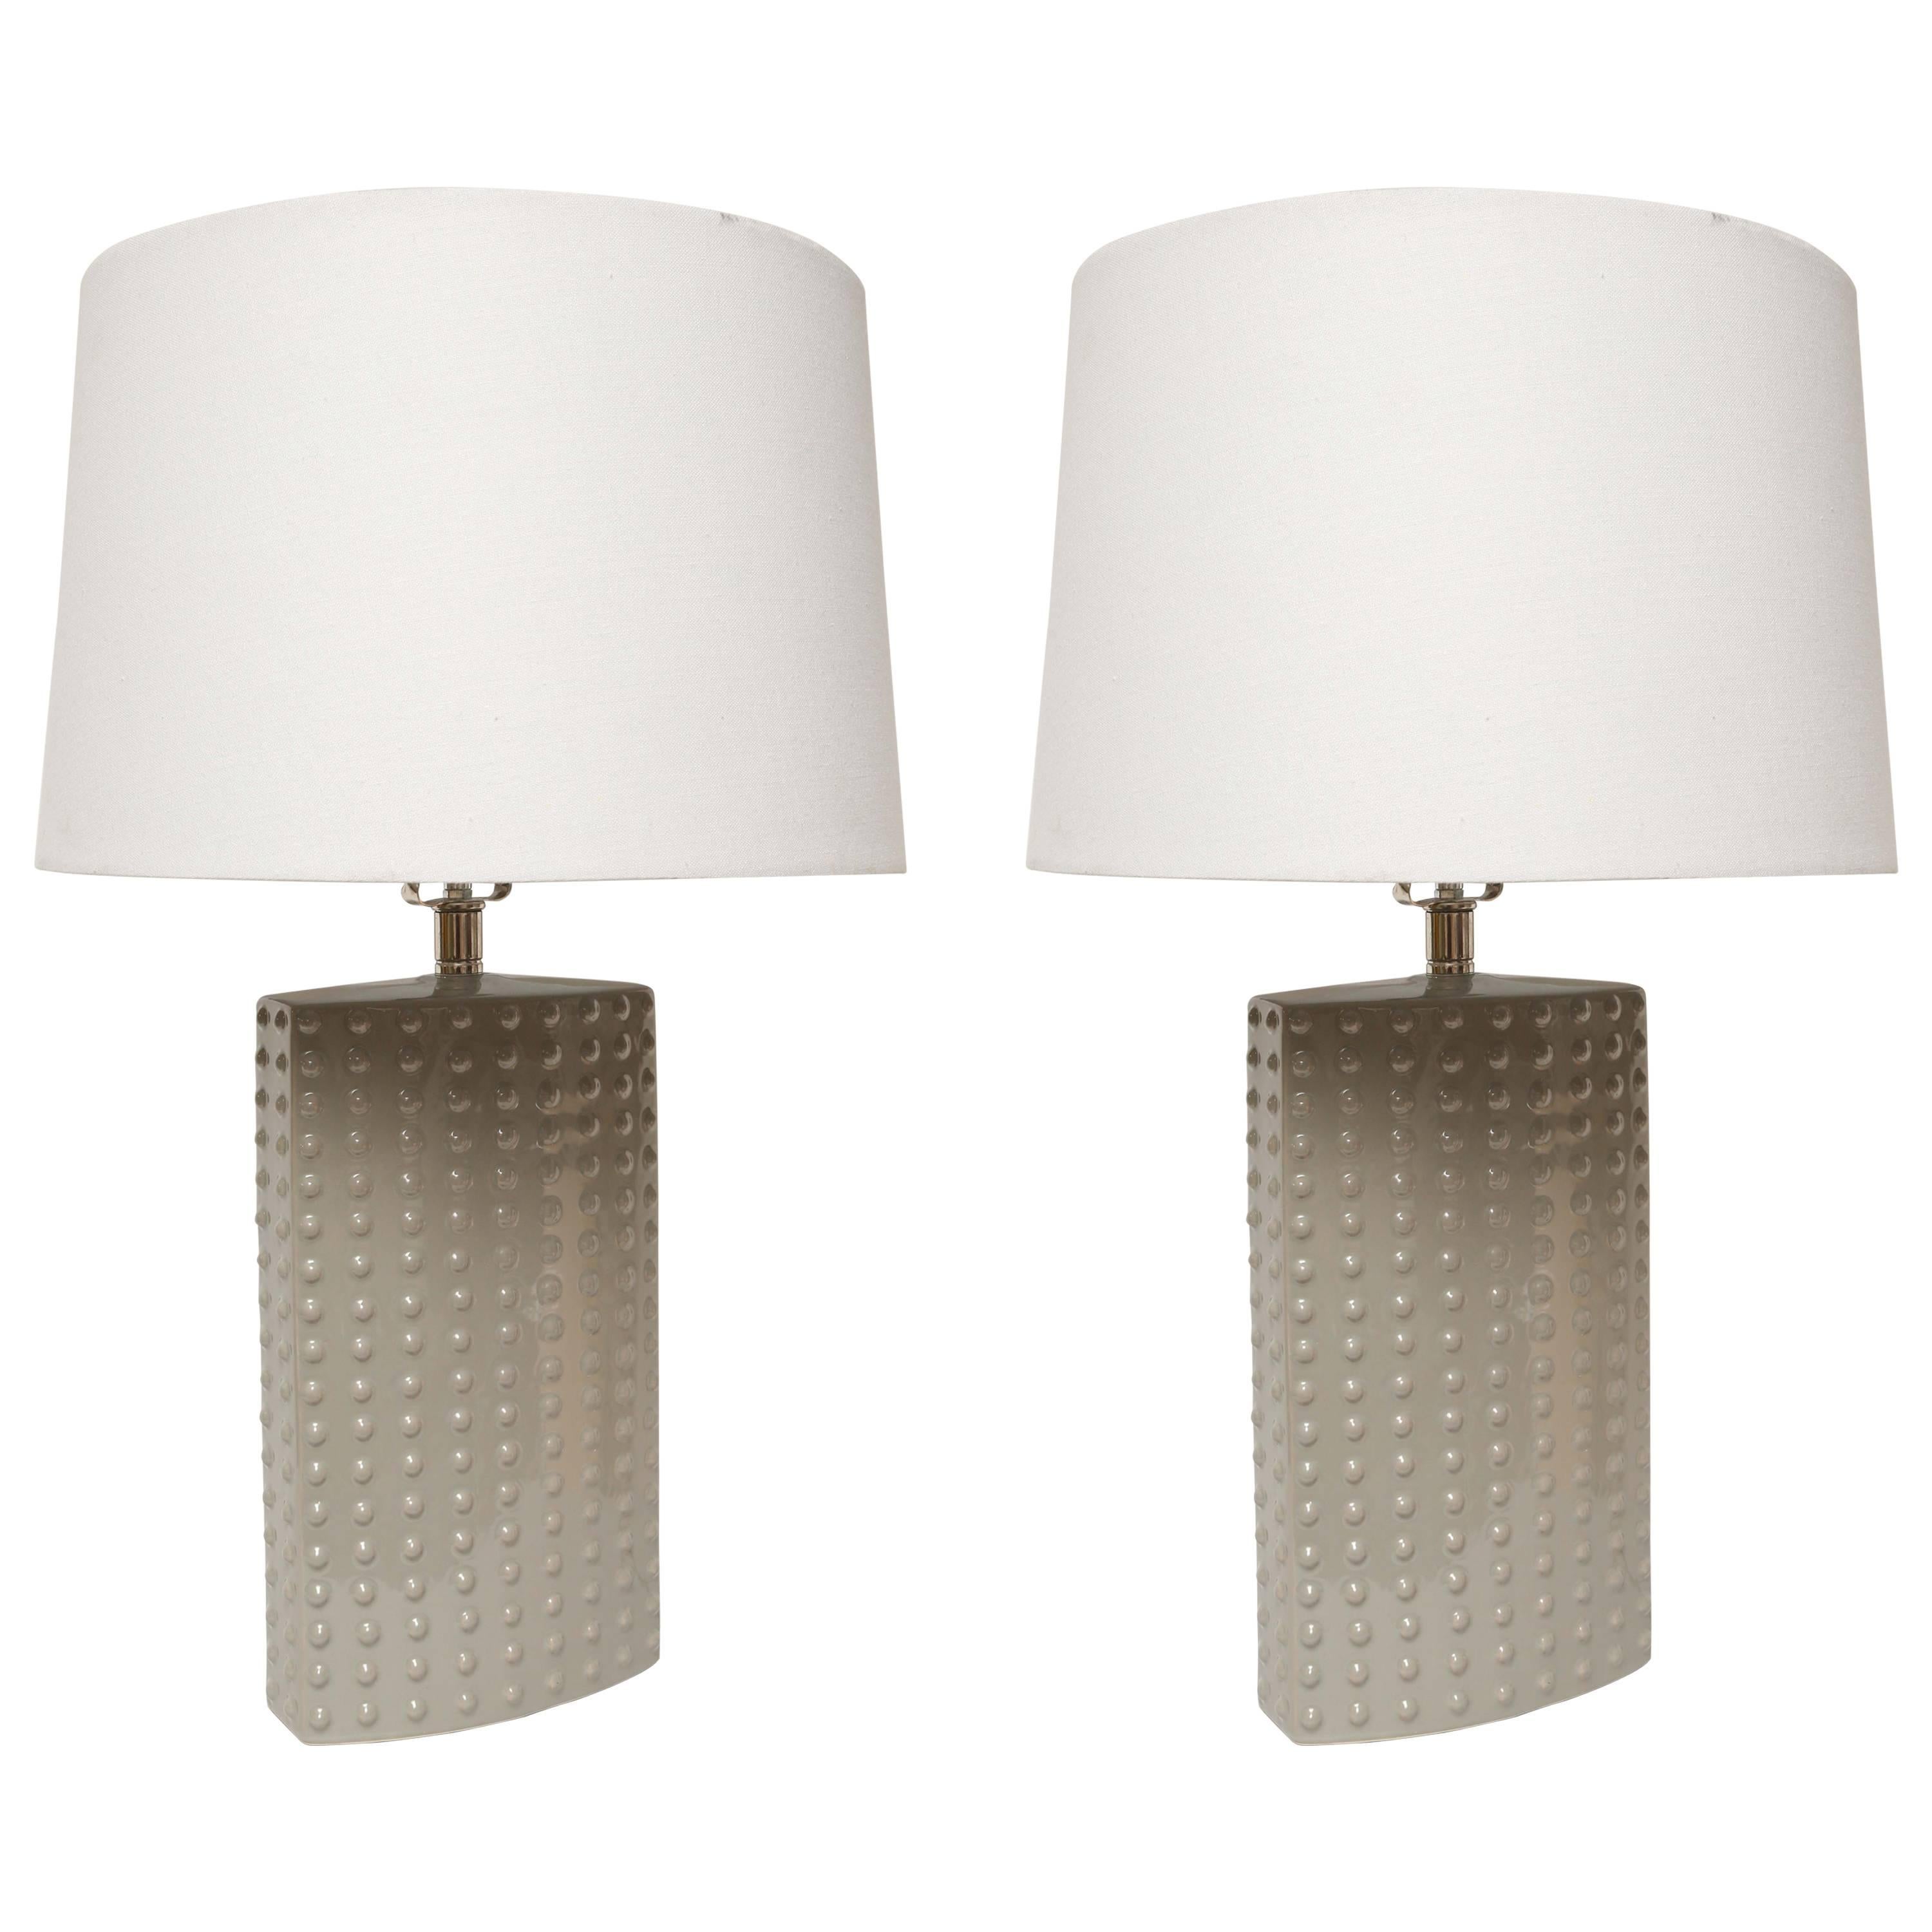 Pair of Mid-Century Modern Axel Salto Budding Style Gray Ceramic Table Lamps